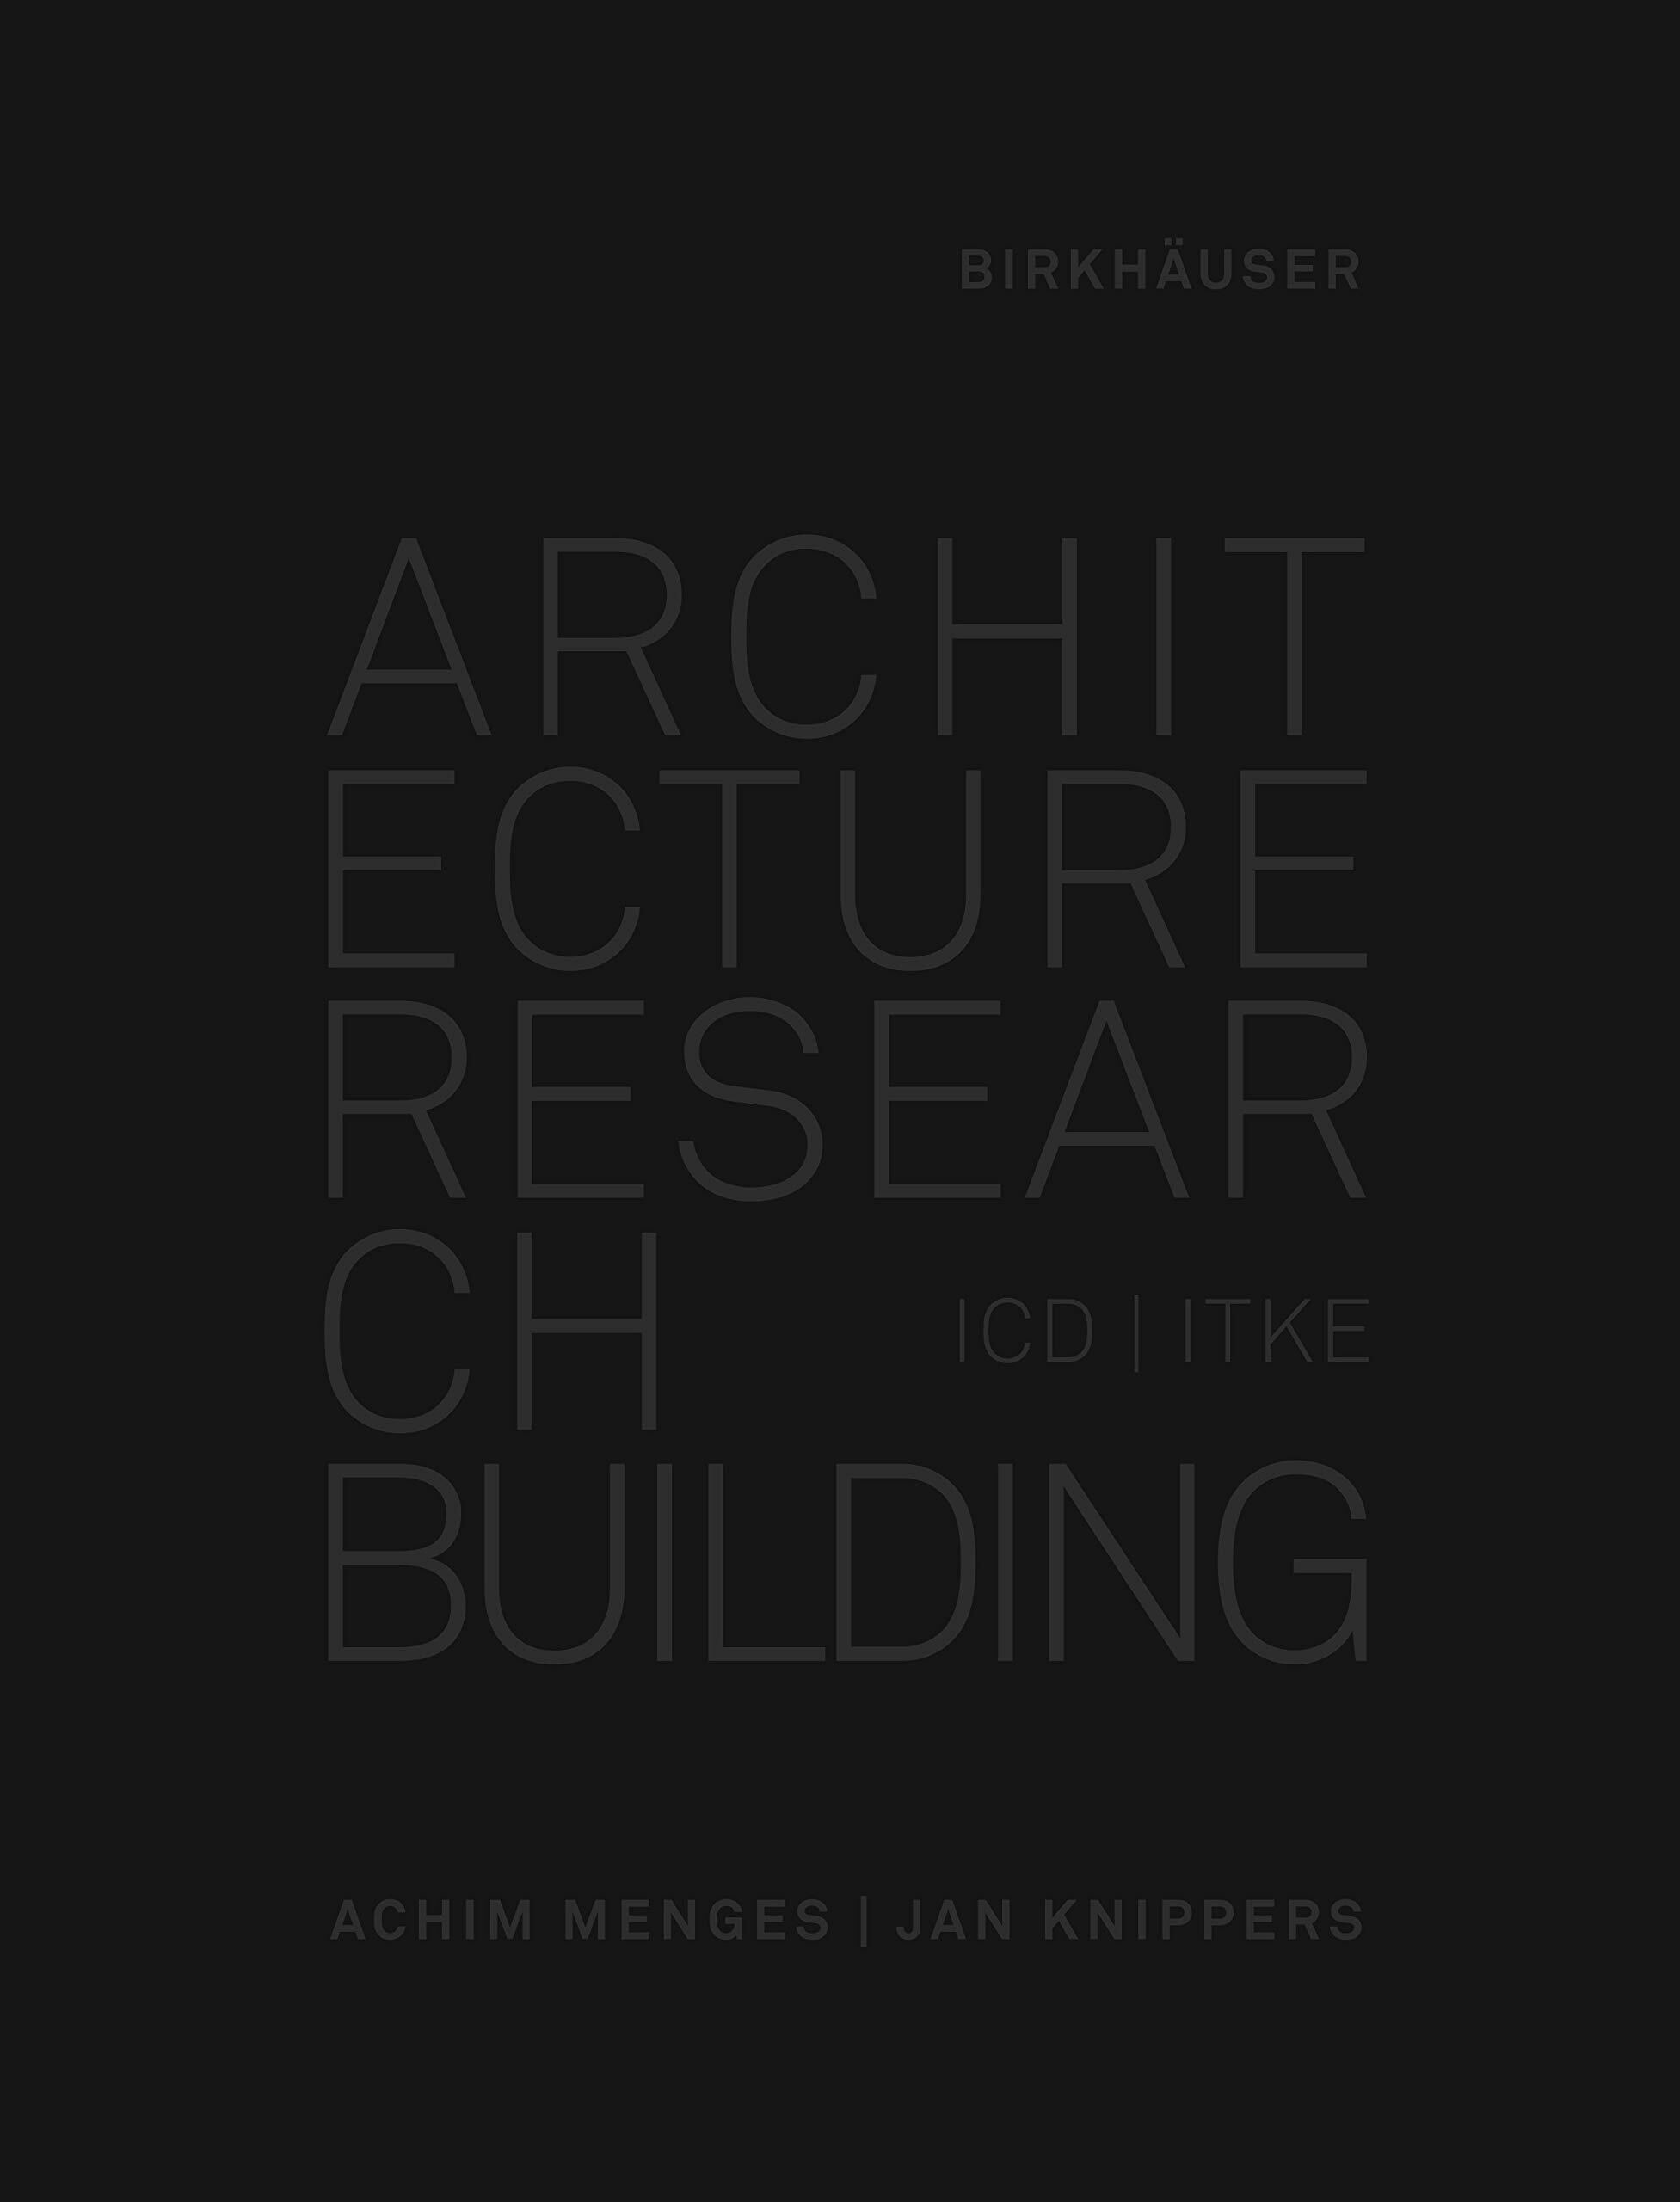 Architecture Research Building: ICD/Itke 2010-2020 (Hardcover)